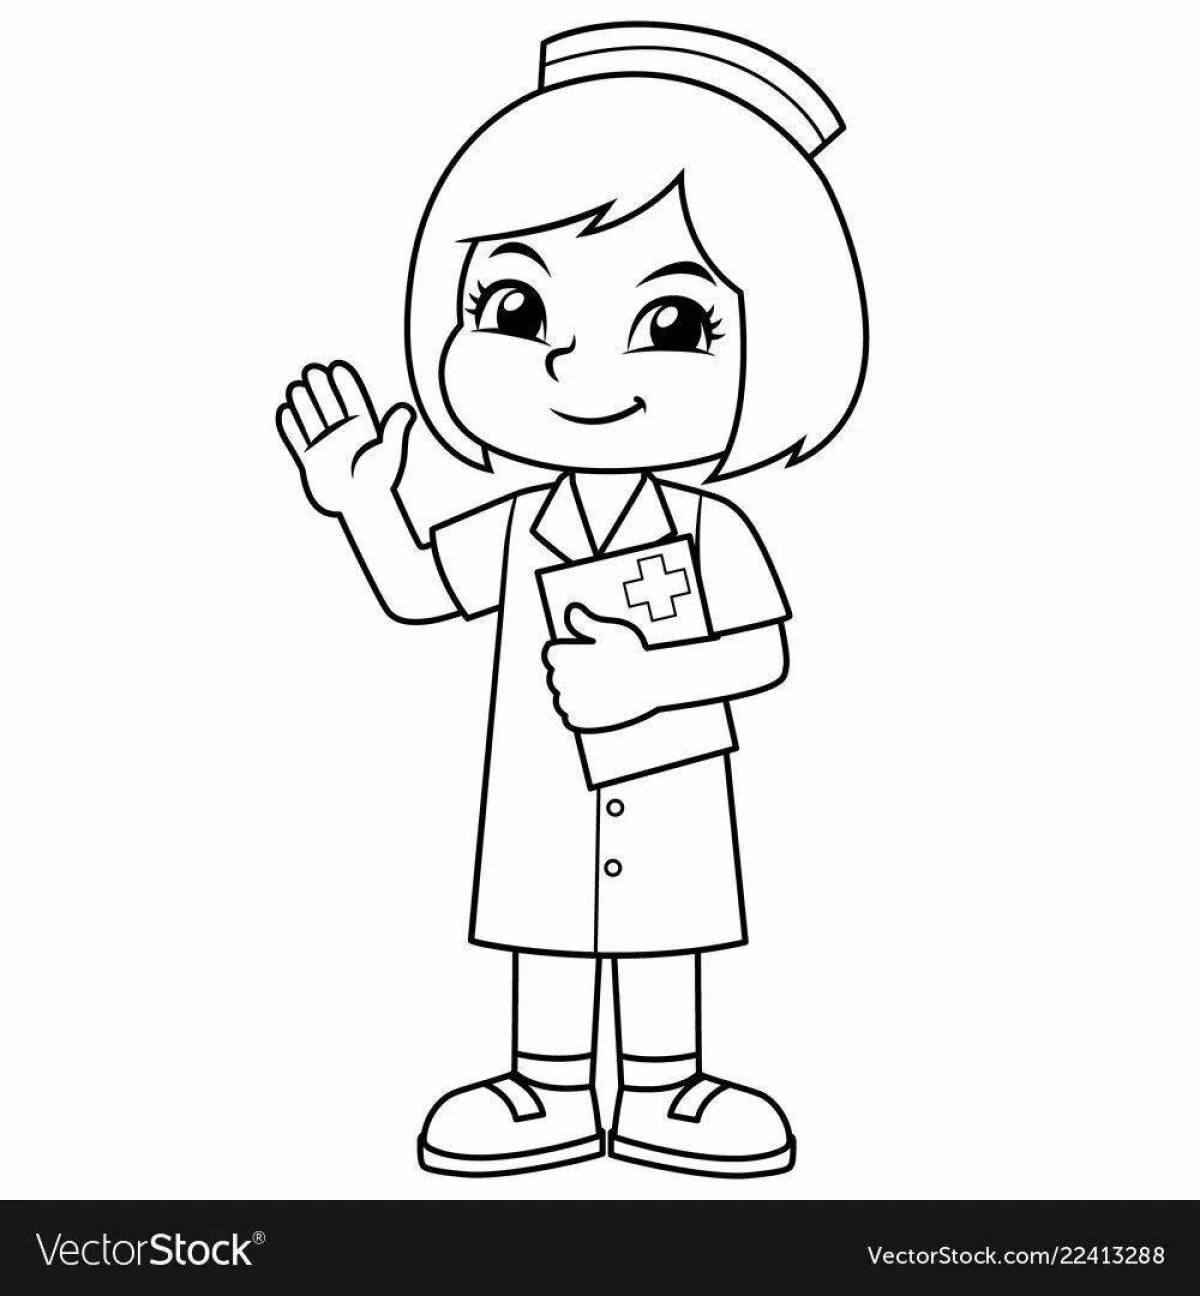 Distinguished Military Nurse Coloring Page for Kids